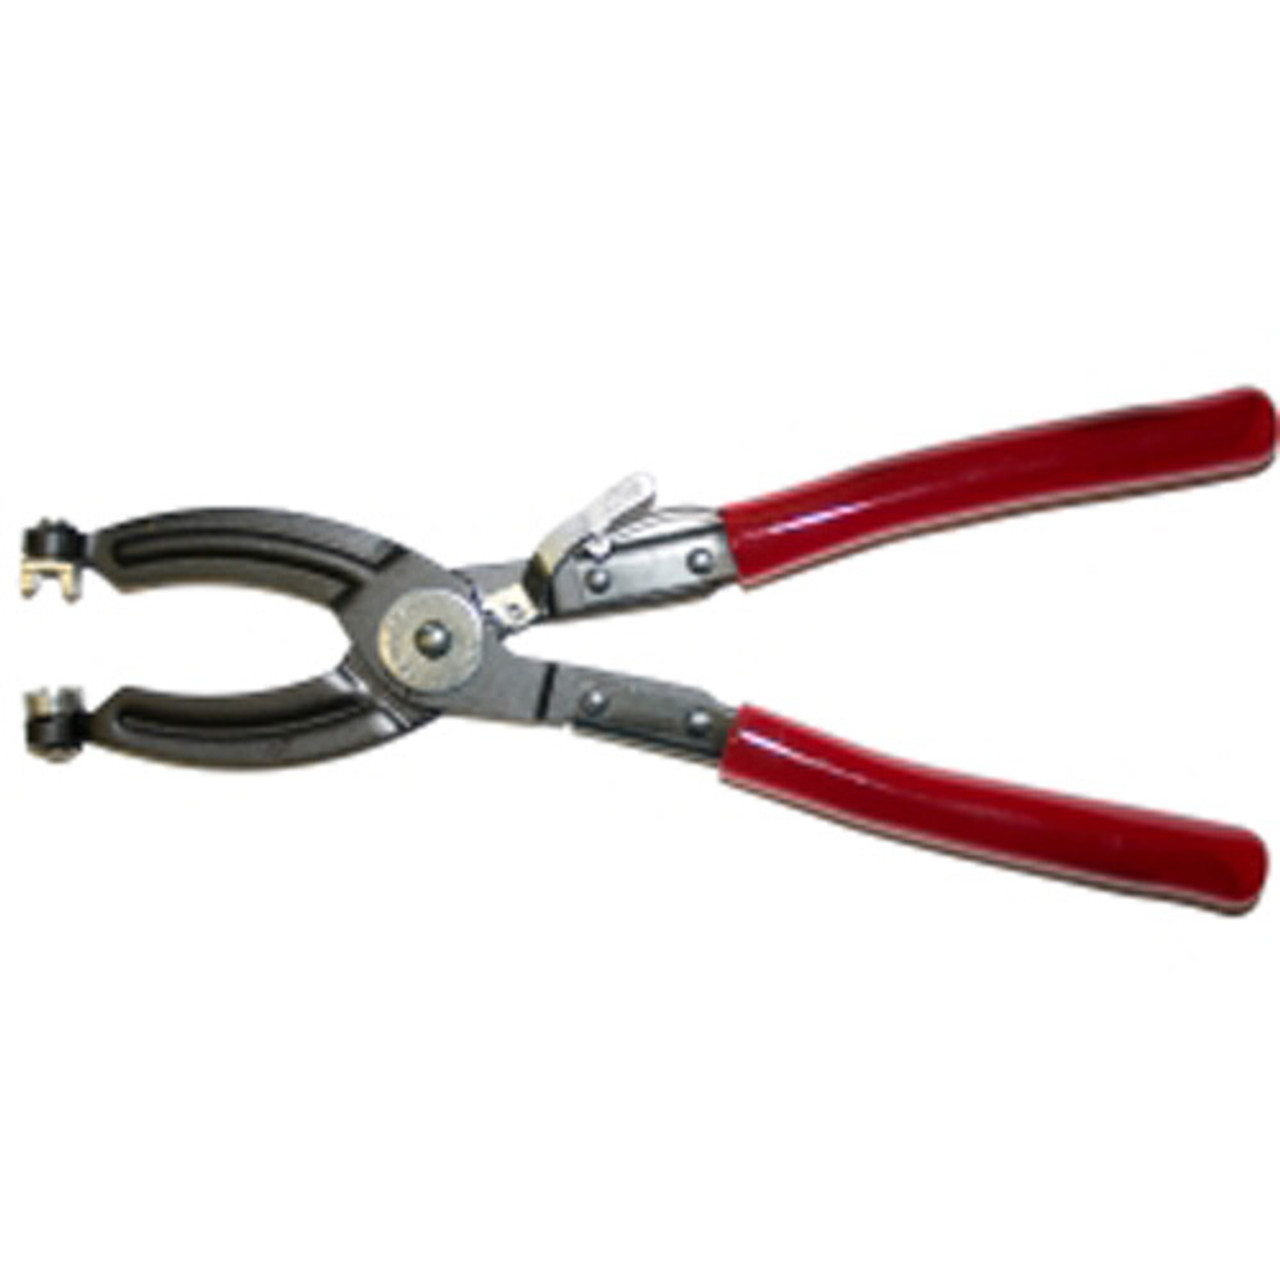 Tools 860L Mobea or Constant Tension Hose Clamp Plier with Extended  Jaws JB Tools